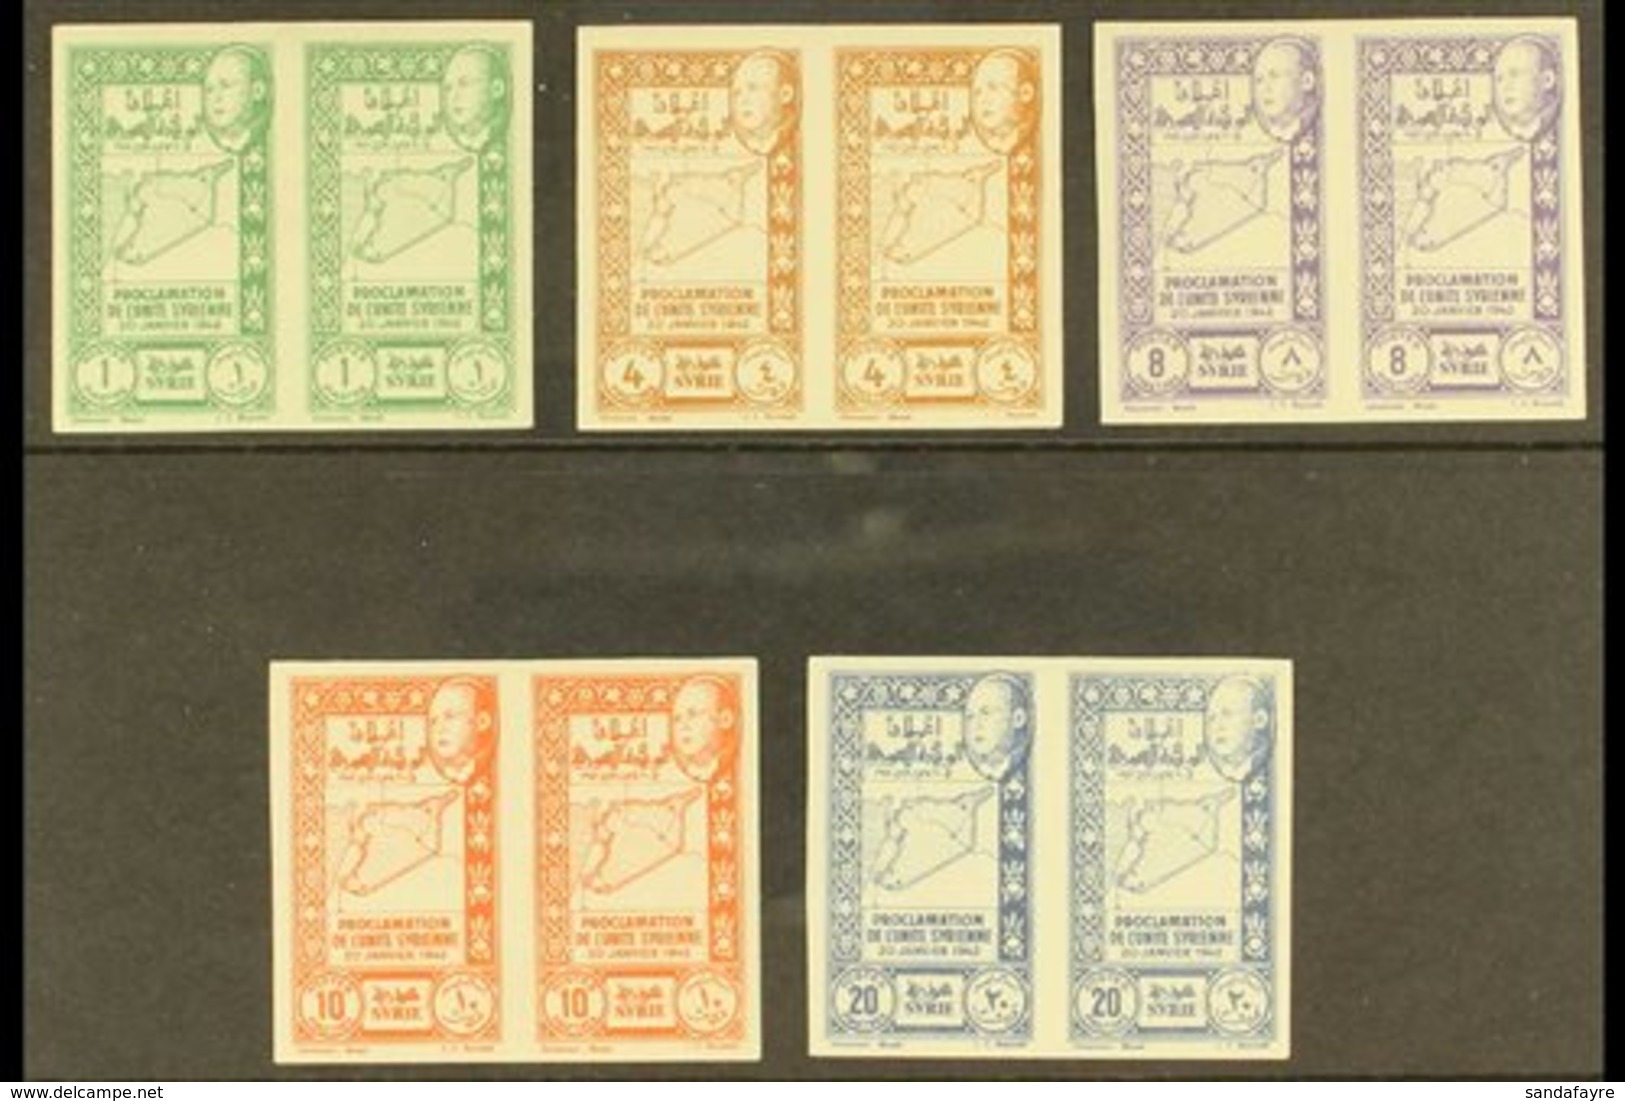 1943  Union Of Latakia & Jebel Druze With Syria - The Complete Postage Set (Maury 283/87, SG 367/71) In IMPERF PAIRS, Ne - Syrien